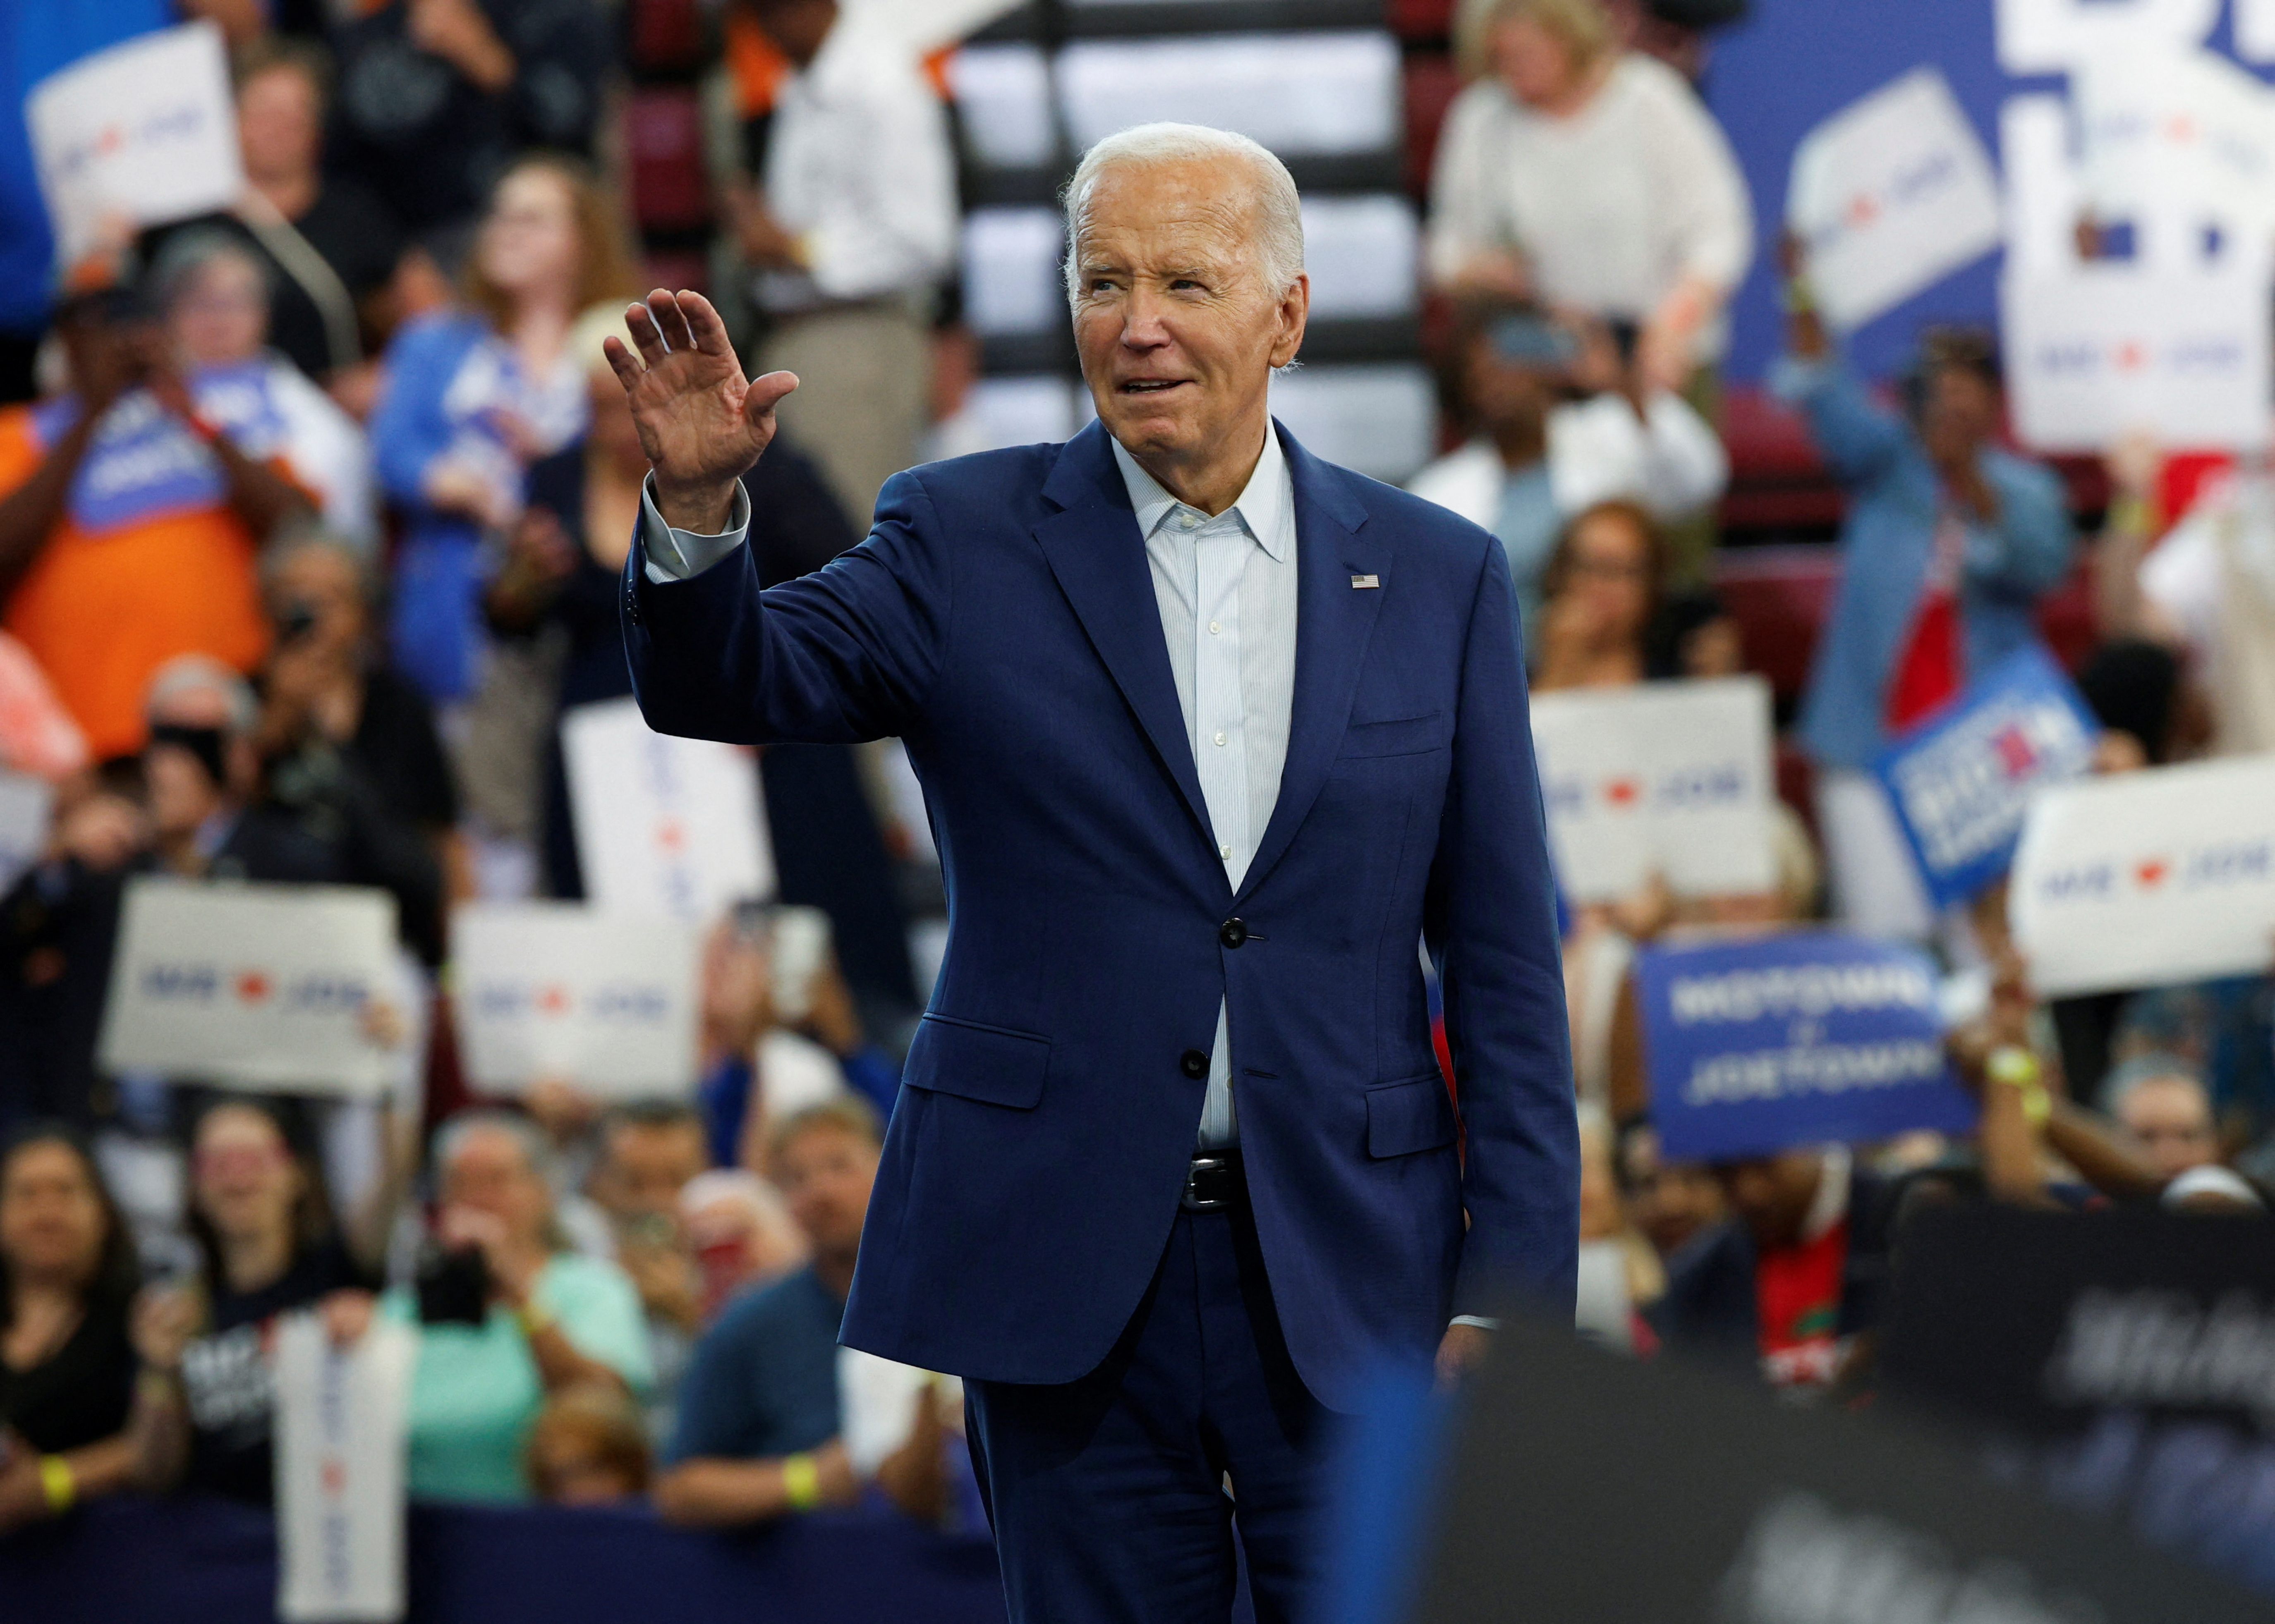 U.S. President Joe Biden waves to his supporters during a campaign stop in Detroit